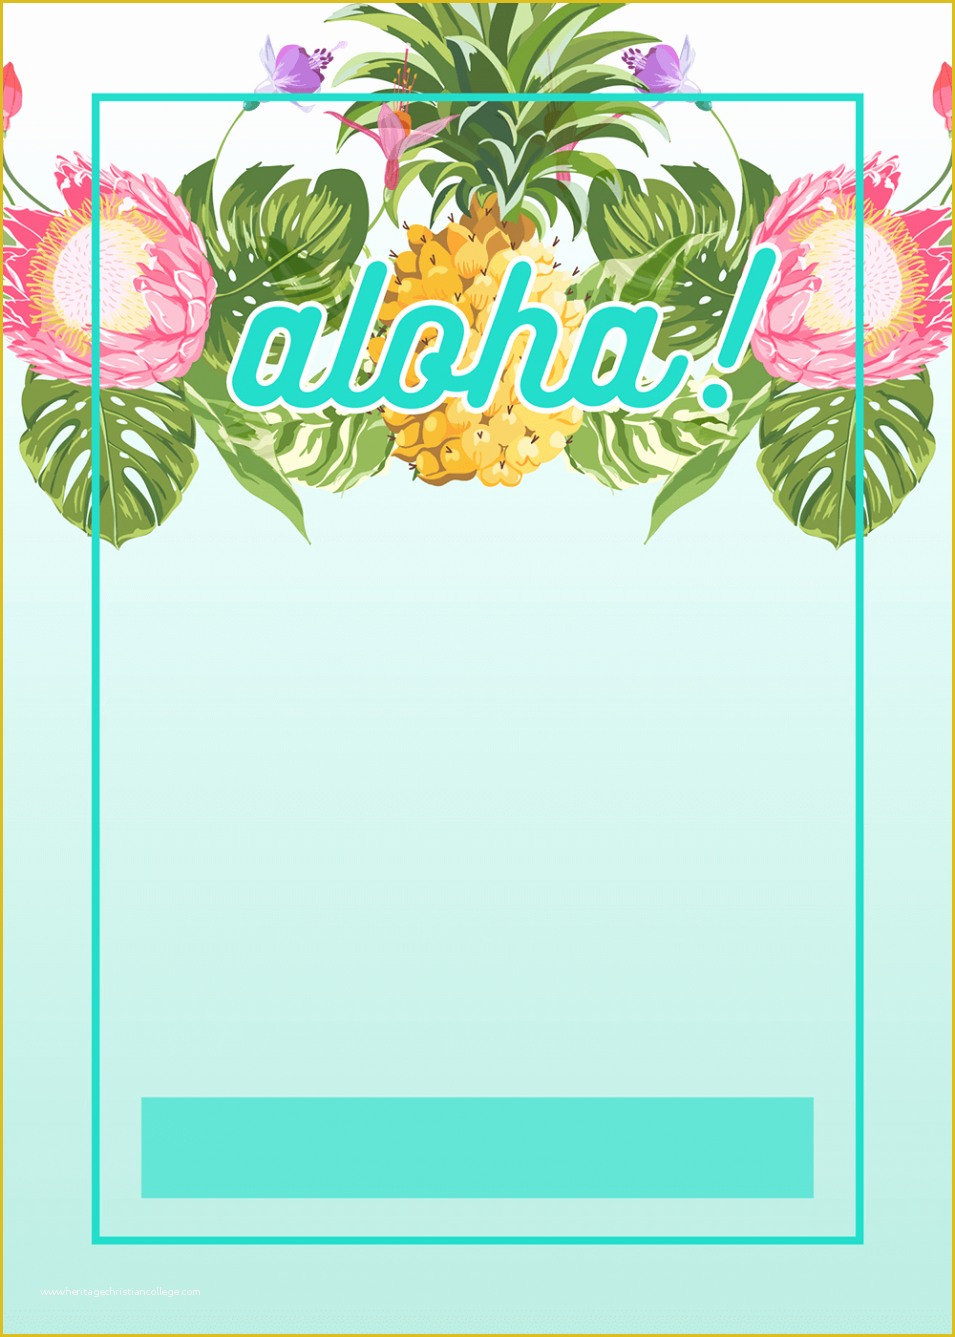 Lake Party Invitation Templates Free Of Tips Perfect Tropical Getaway Design with Luau